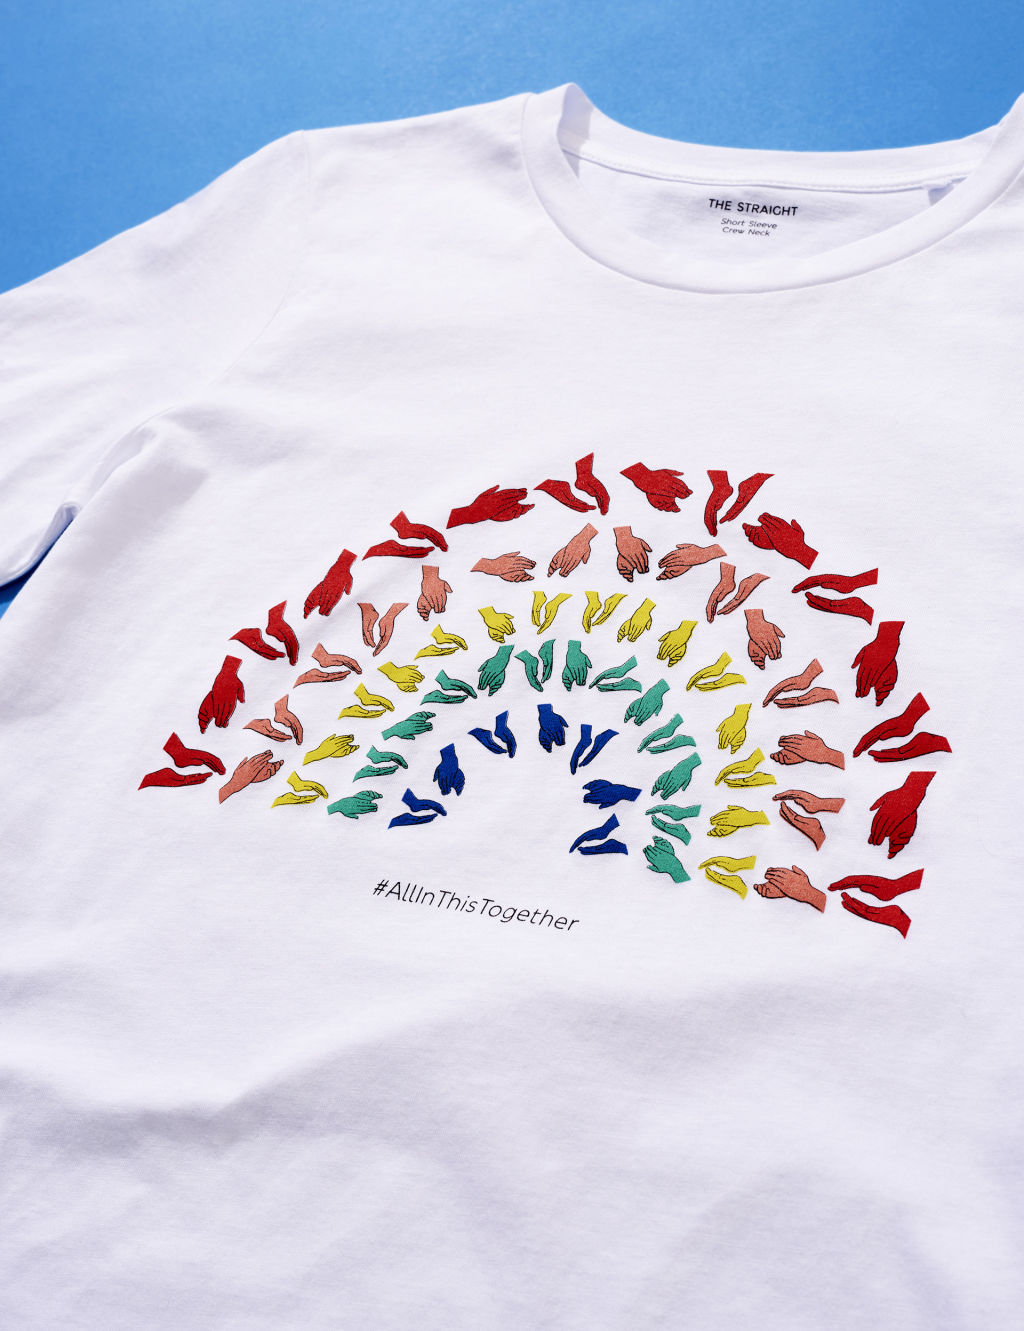 Women's NHS Charities Together Clapping T-Shirt 2 of 2